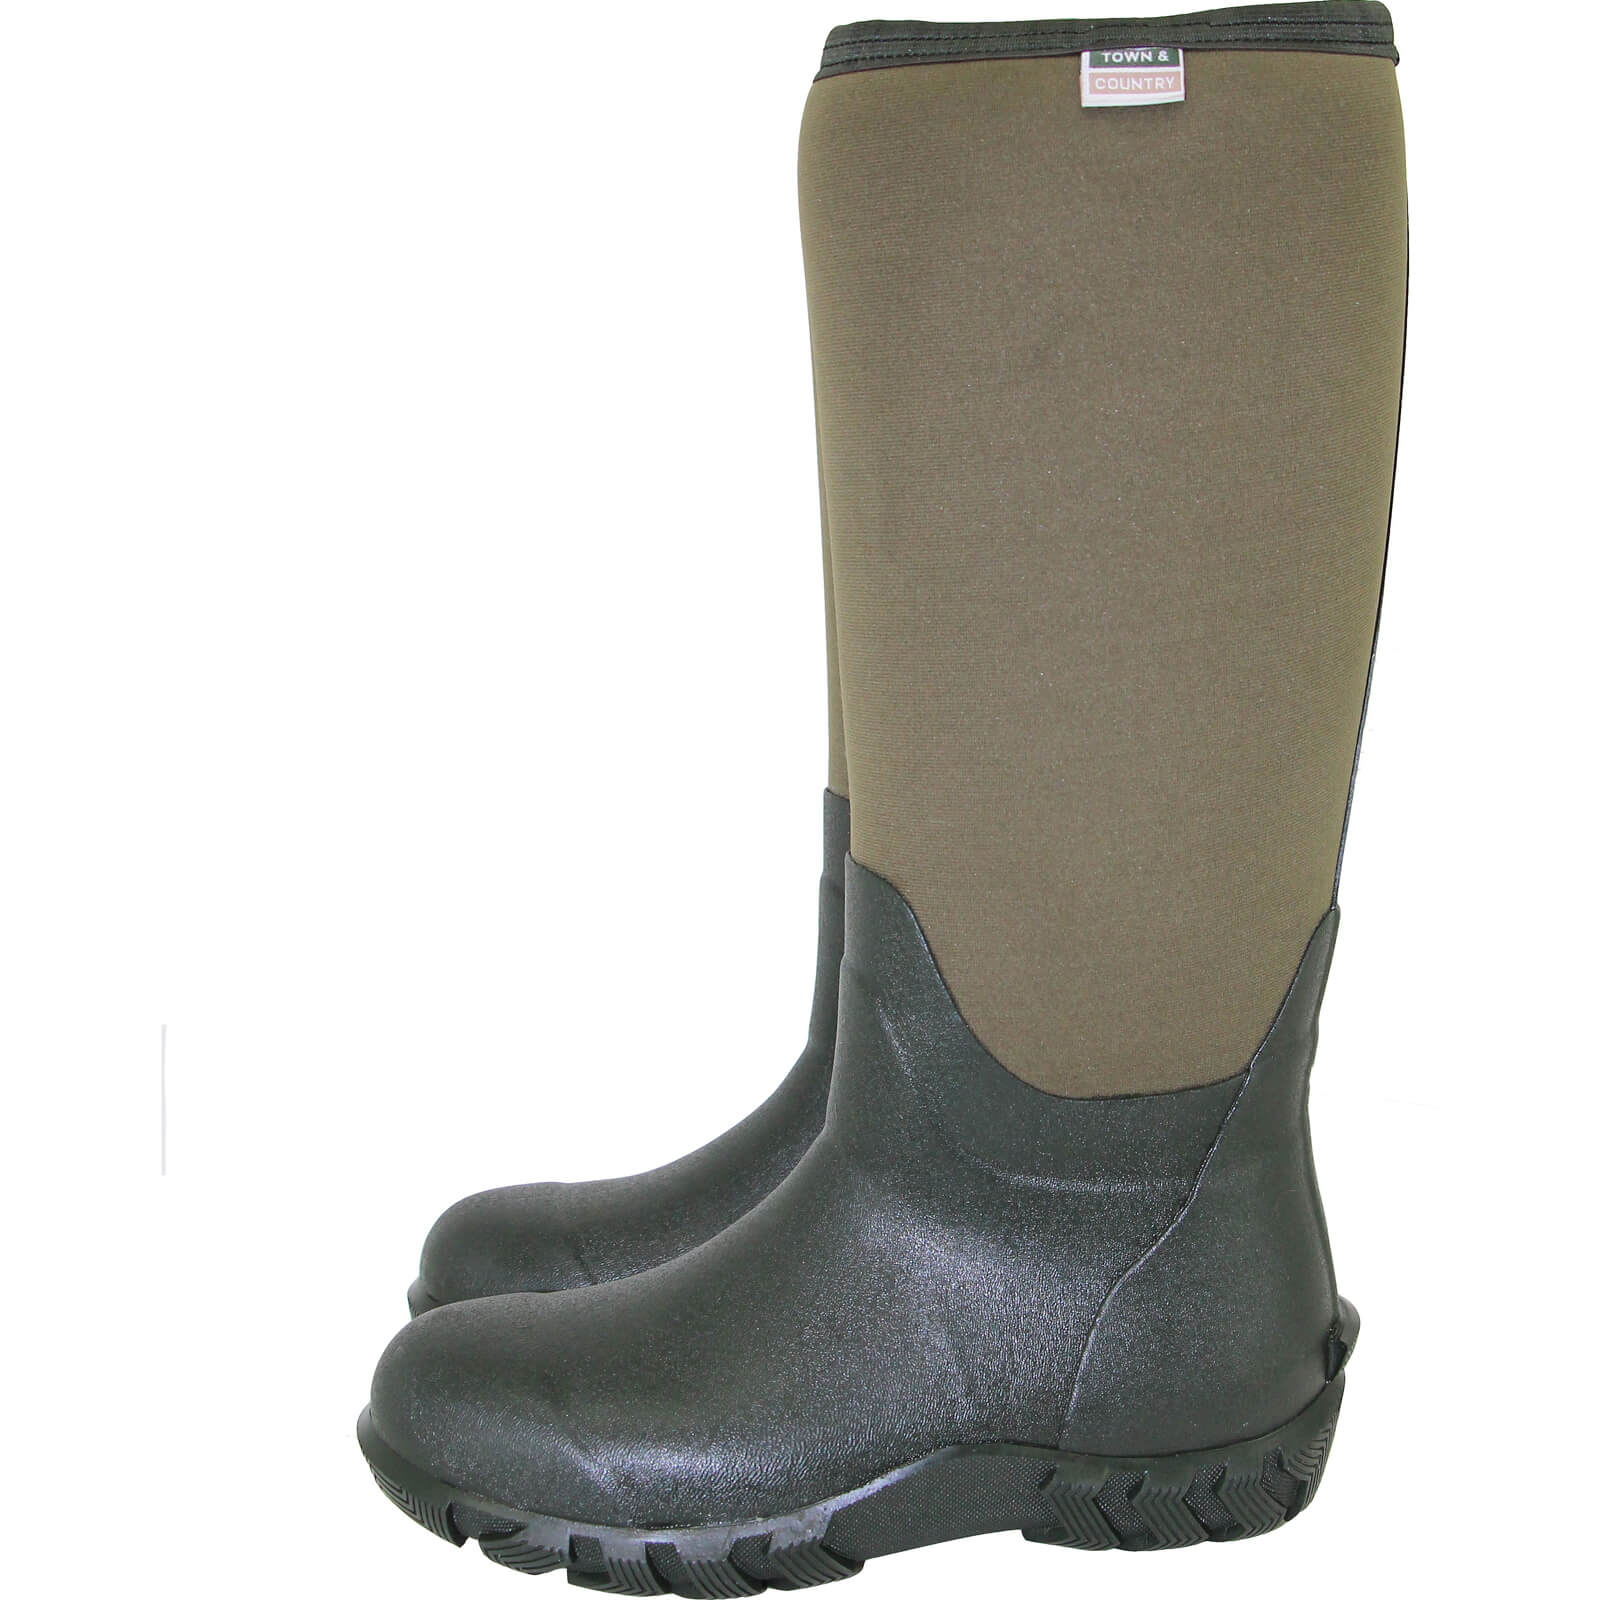 Image of Town and Country Buckingham Rubber Wellington Boots Green Size 12